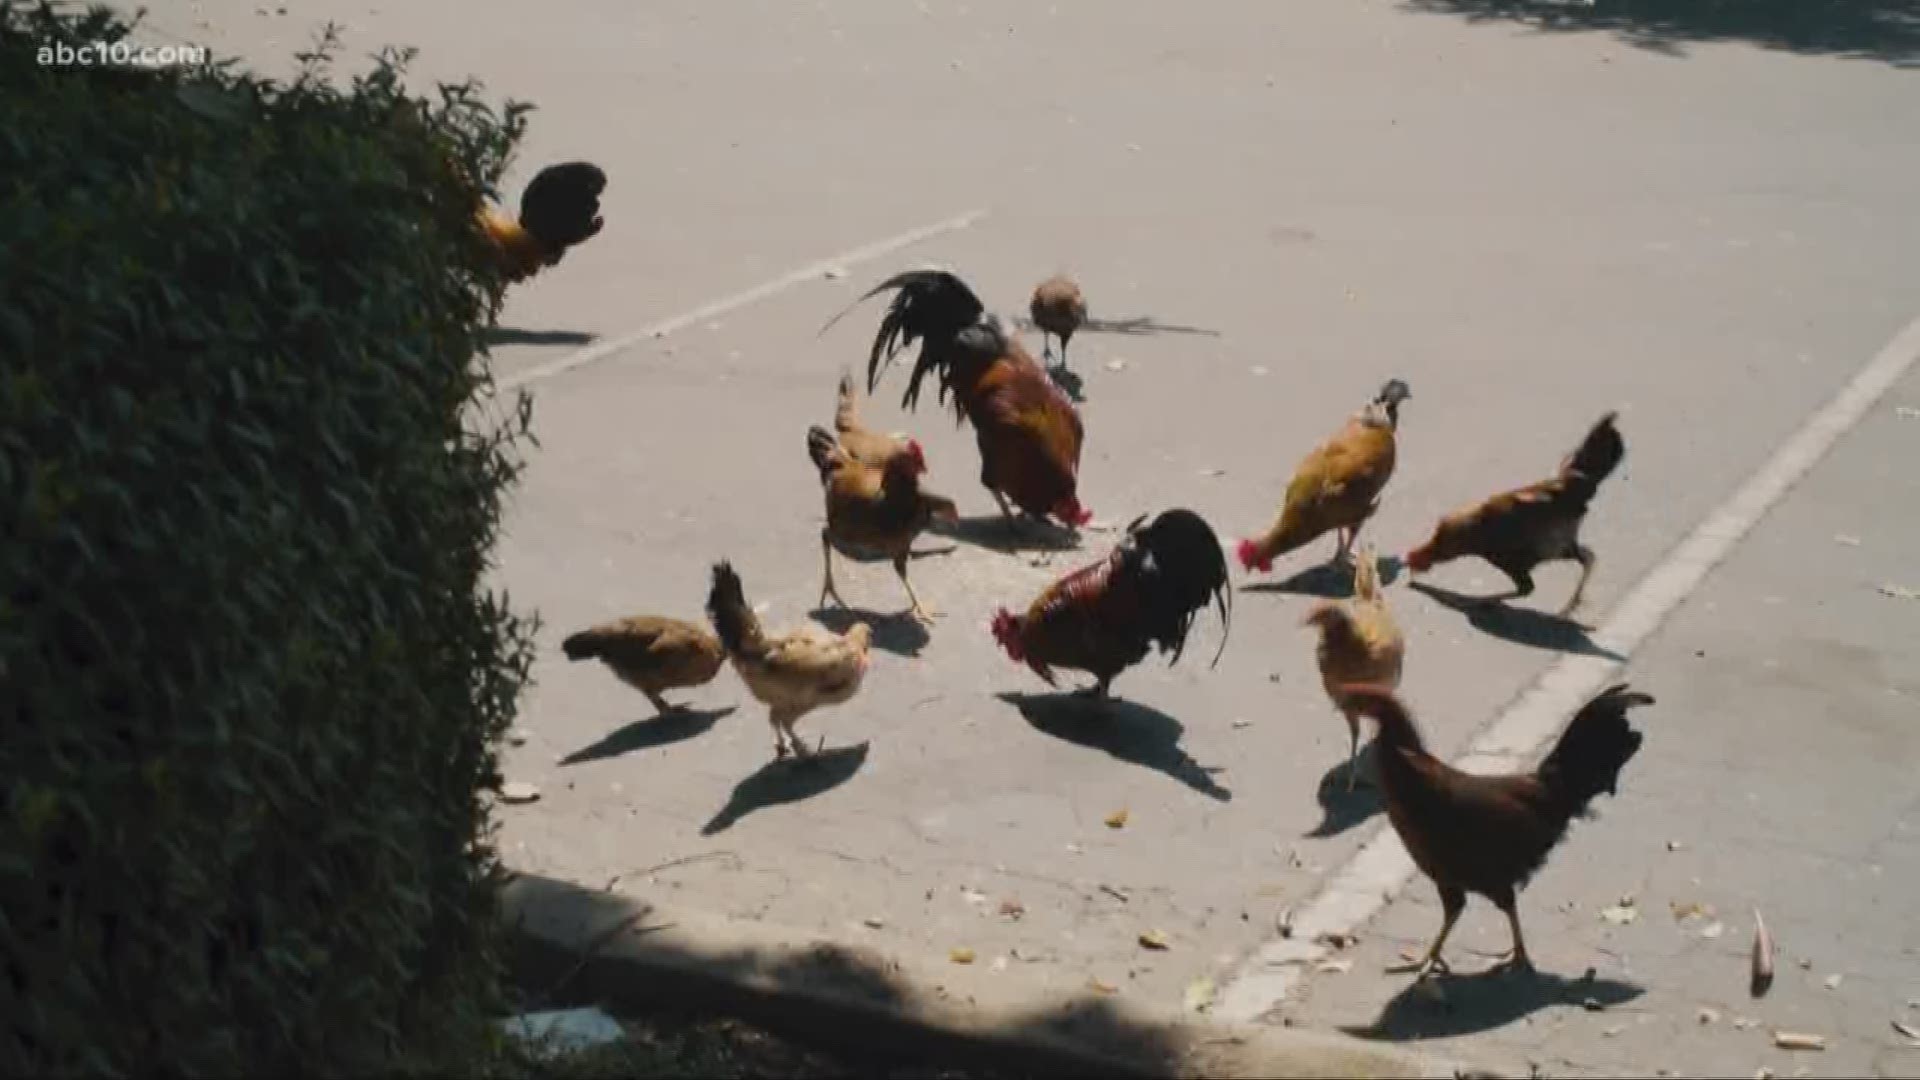 Wild chickens are a staple in Yuba City. But now one seems to know where they come from.